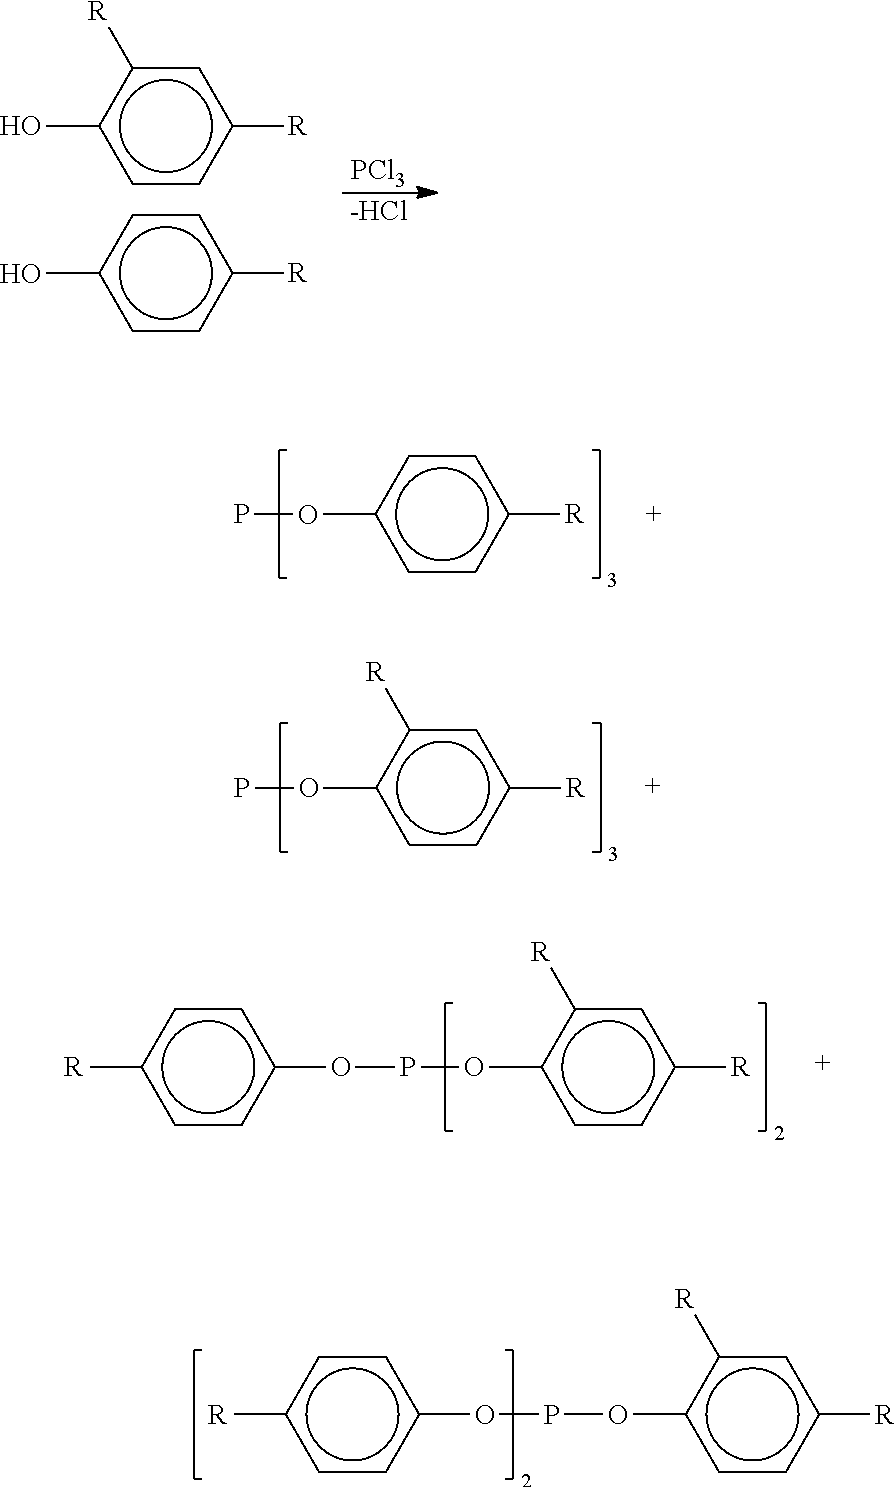 Processes for forming alkylated aryl phosphite compositions from complex hydrocarbon streams